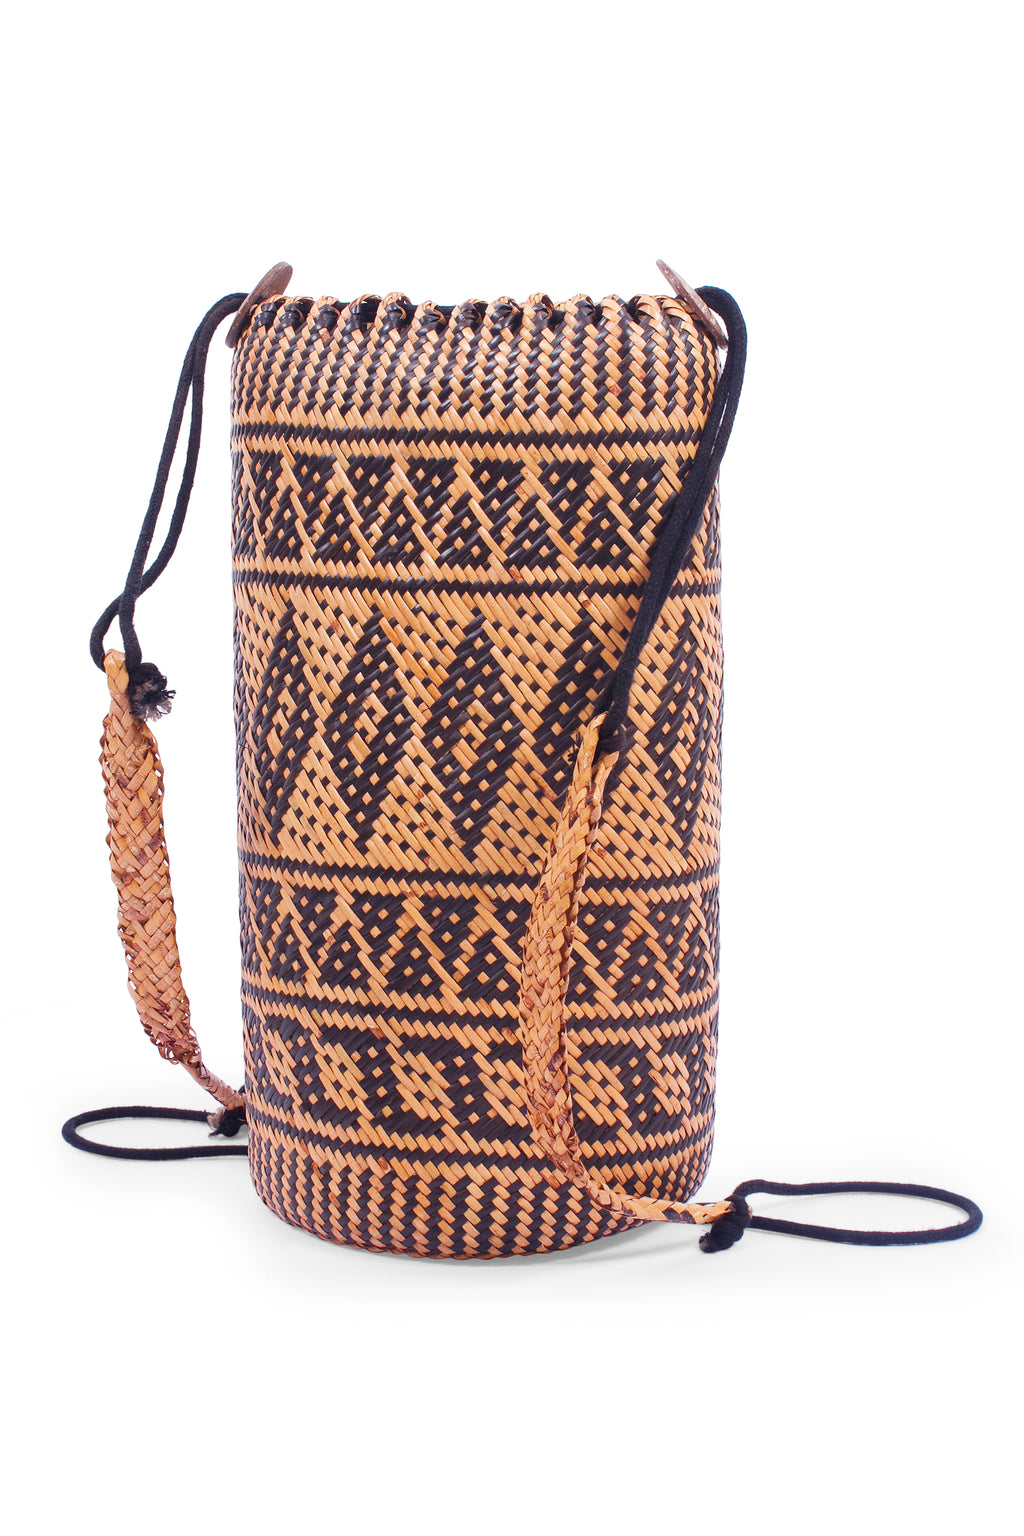 Made in Bali Natural Woven Women Backpack